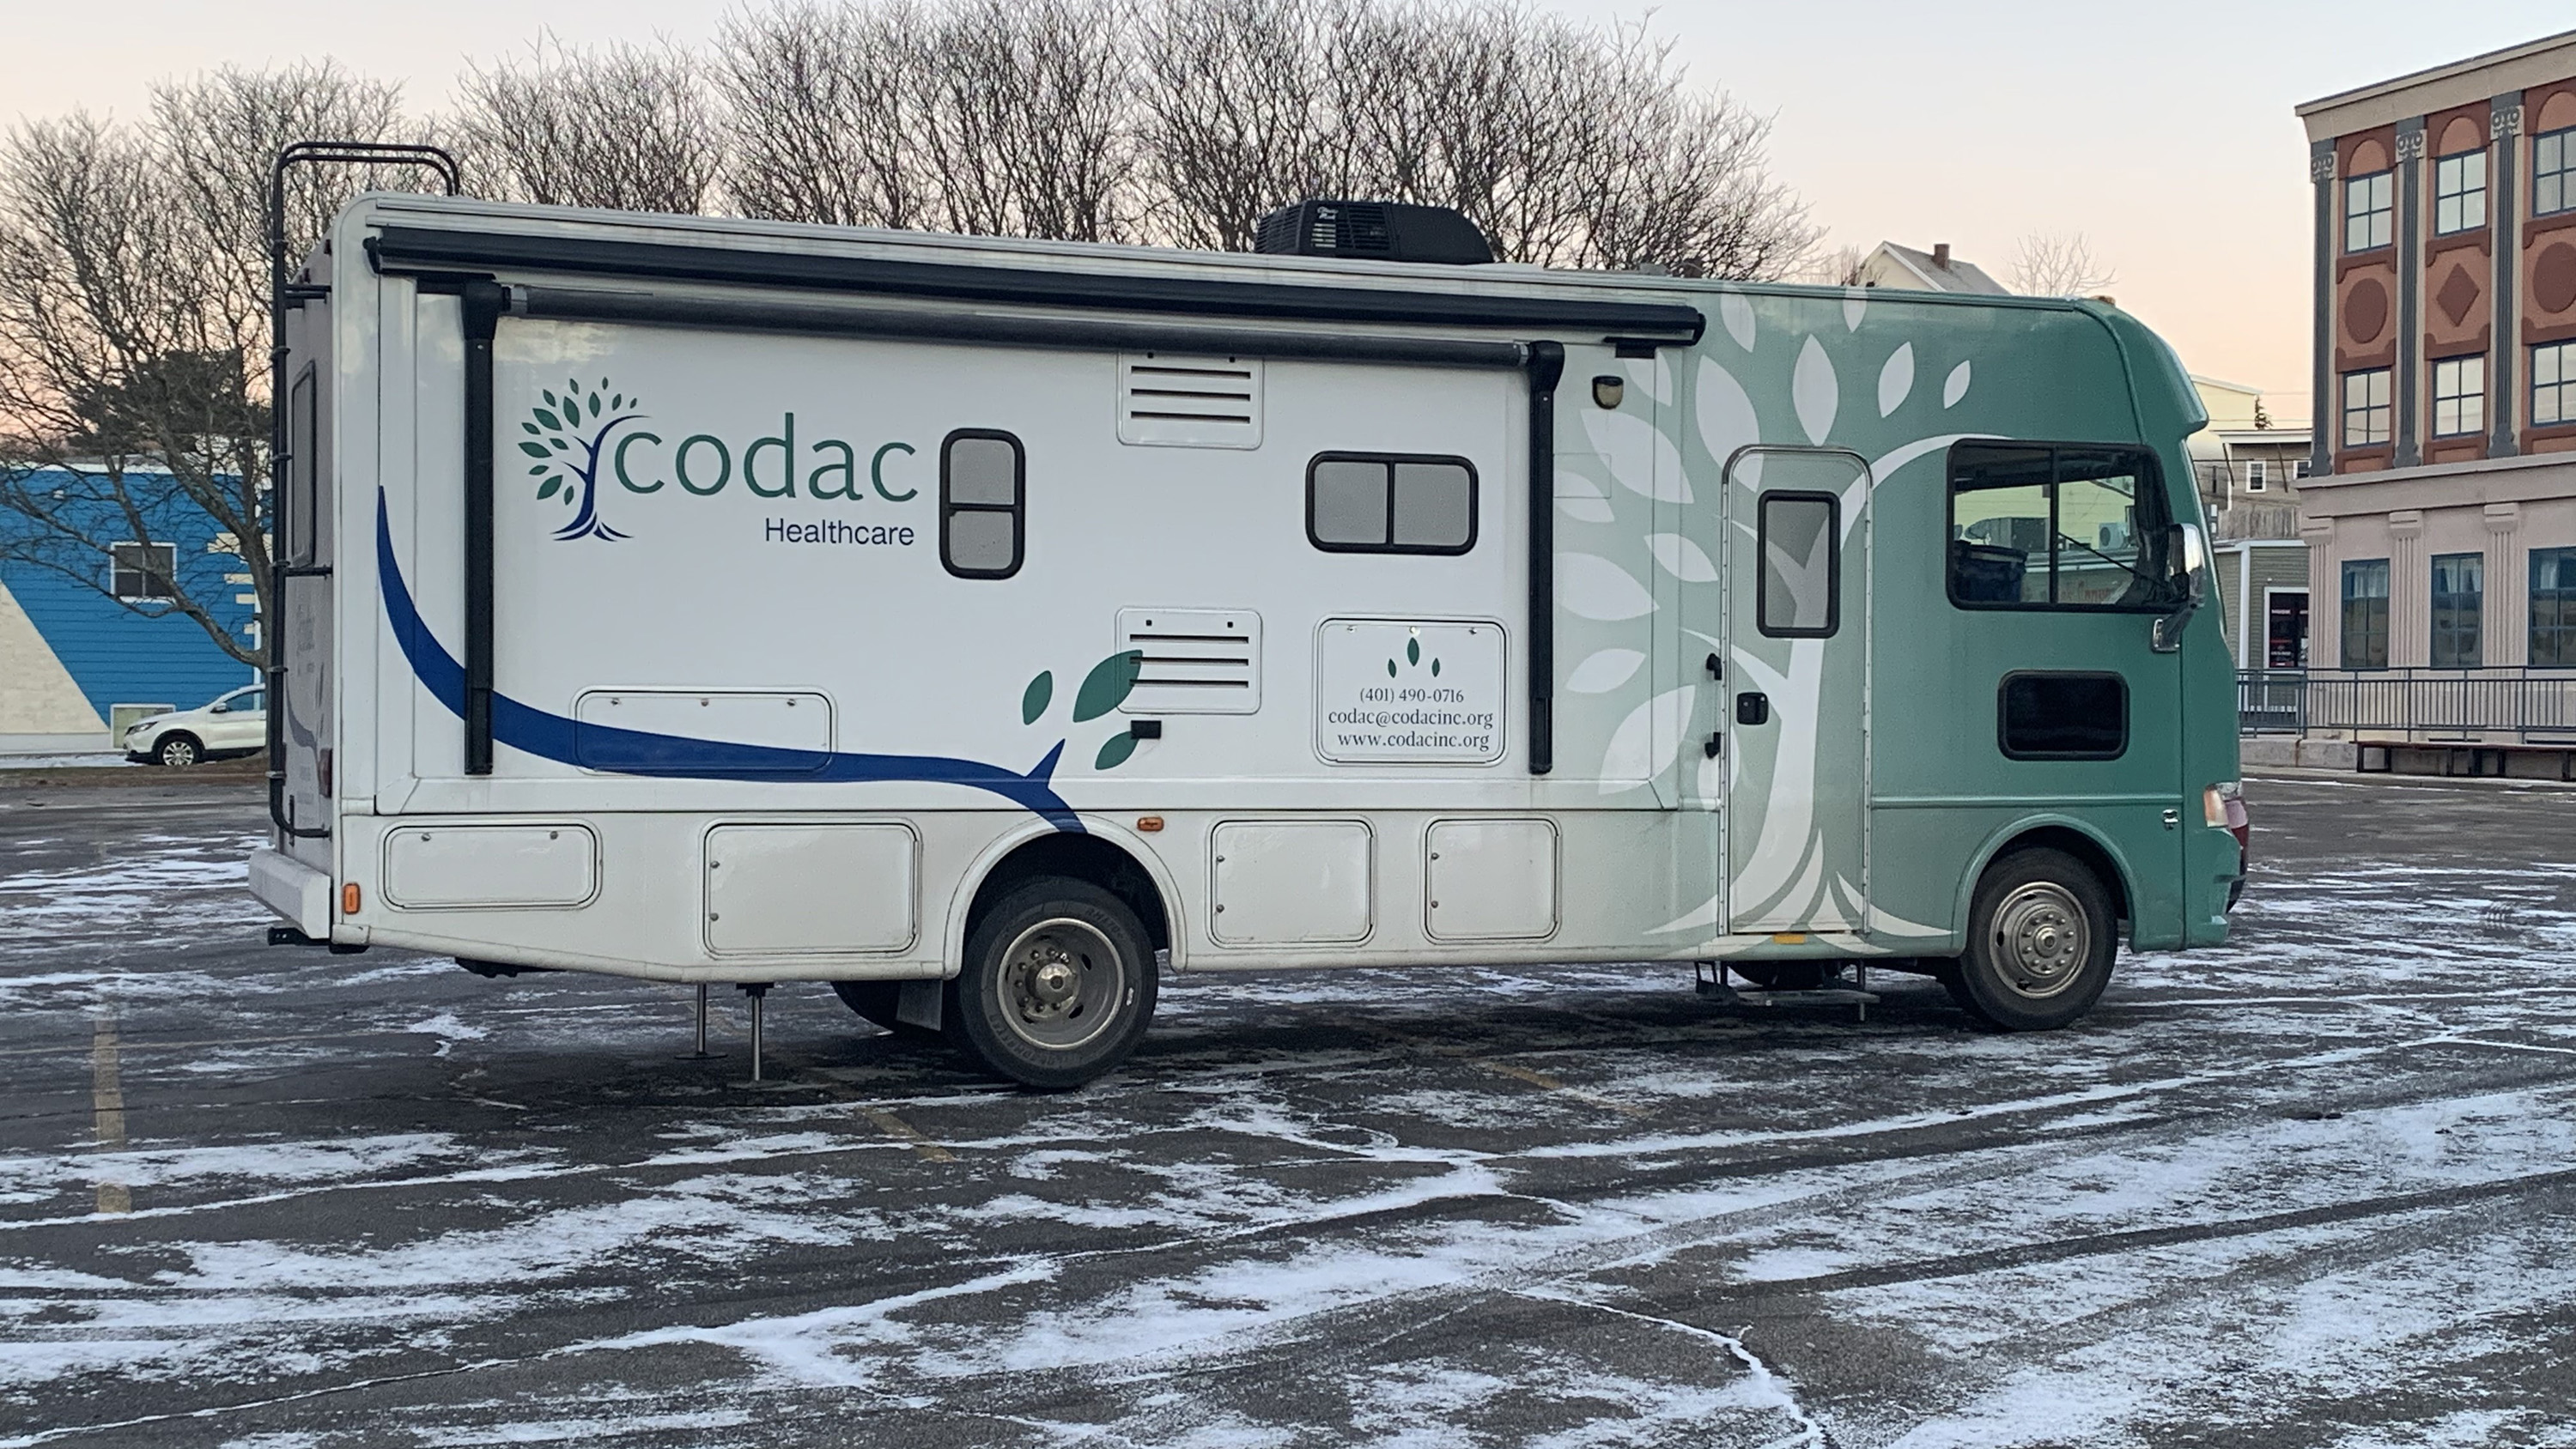  In July, CODAC Behavioral Healthcare launched one of the first mobile clinics licensed to dispense methadone in the U.S. in more than a decade.